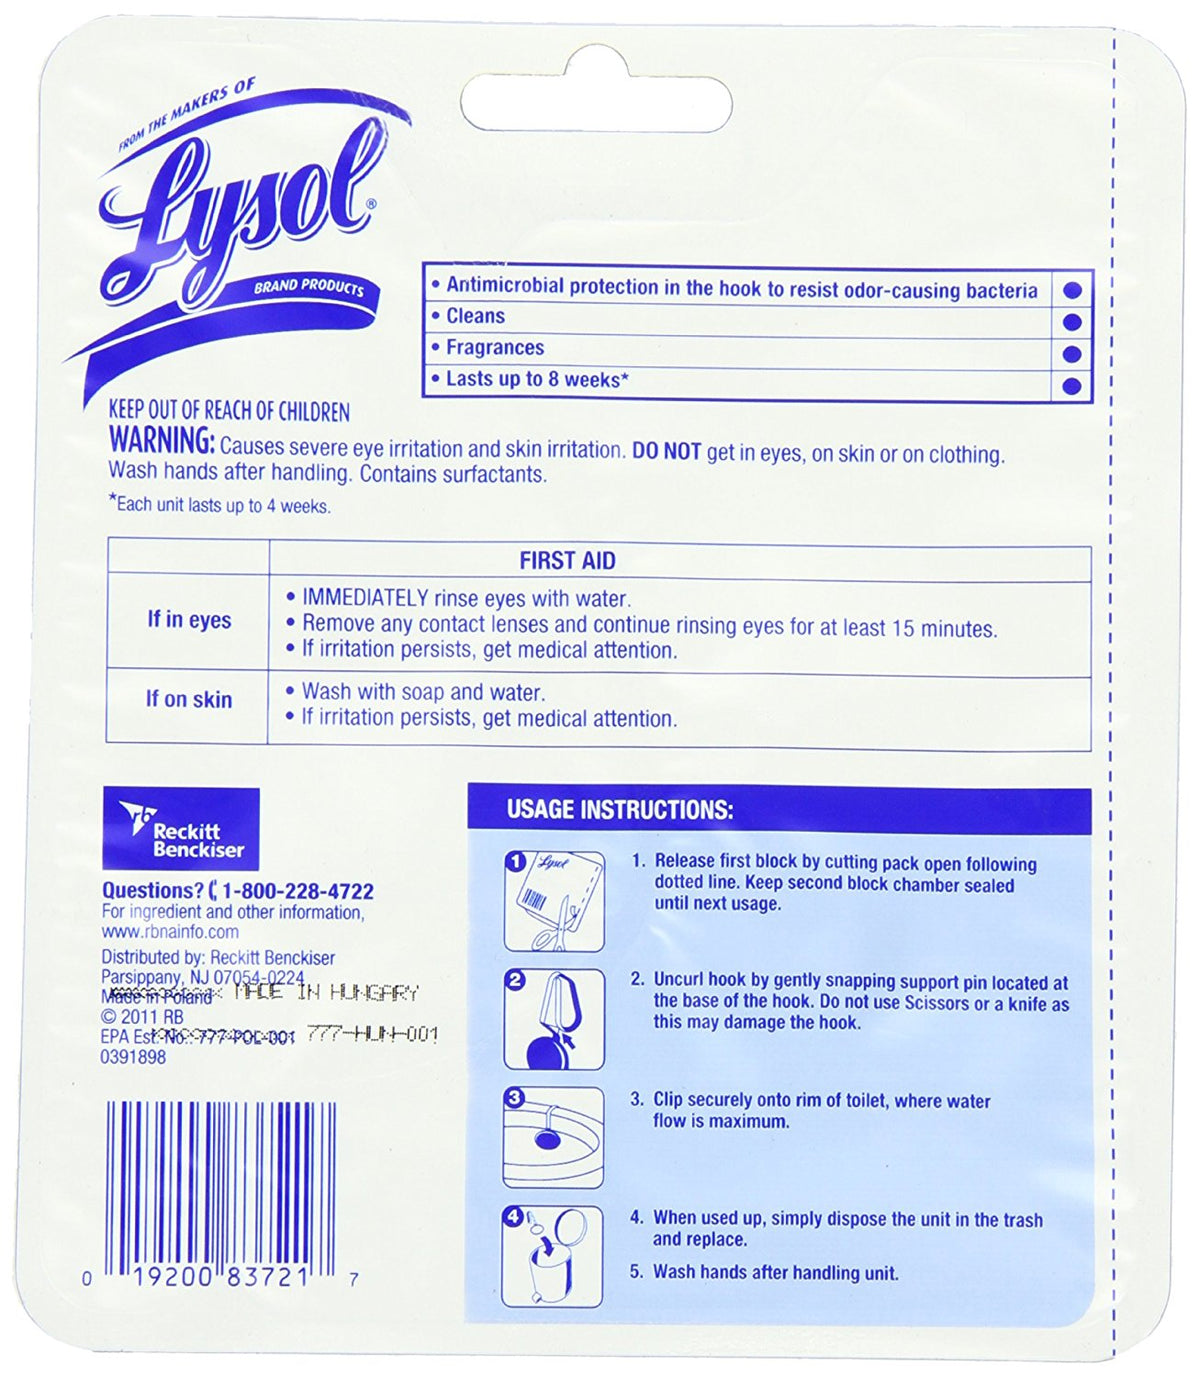 Lysol 083721 Hygienic Automatic Toilet Bowl Cleaner, Atlantic Fresh, 2-Pack